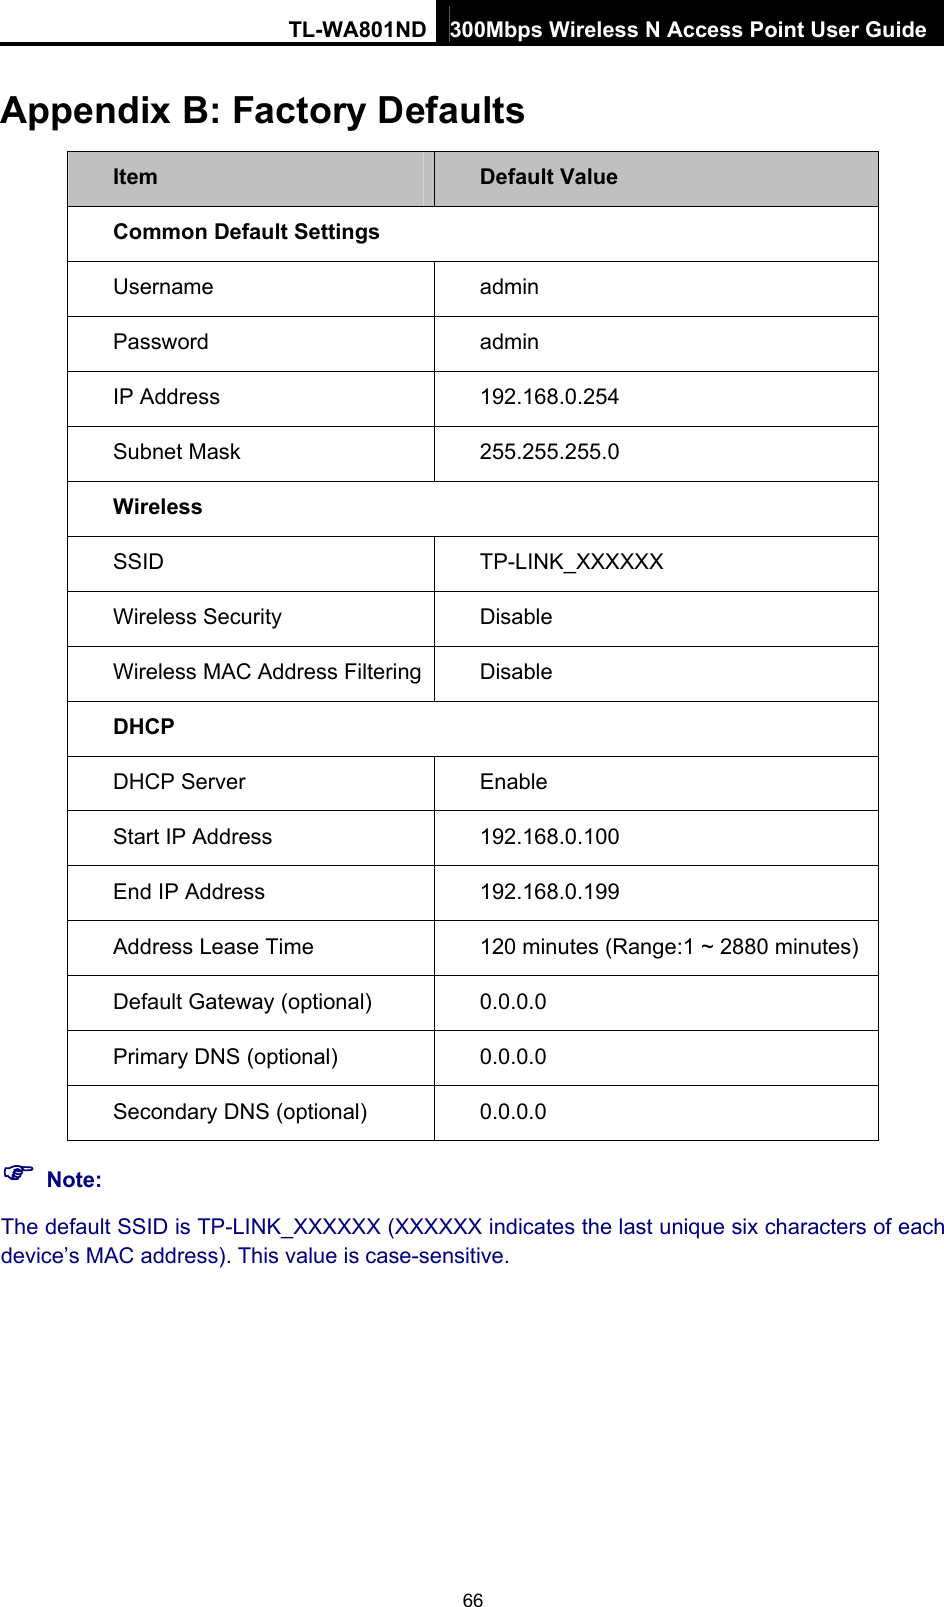 TL-WA801ND 300Mbps Wireless N Access Point User Guide Appendix B: Factory Defaults Item  Default Value Common Default Settings Username   admin Password  admin IP Address  192.168.0.254 Subnet Mask    255.255.255.0 Wireless SSID  TP-LINK_XXXXXX Wireless Security  Disable Wireless MAC Address Filtering  Disable DHCP DHCP Server  Enable Start IP Address  192.168.0.100 End IP Address  192.168.0.199 Address Lease Time  120 minutes (Range:1 ~ 2880 minutes) Default Gateway (optional)    0.0.0.0 Primary DNS (optional)  0.0.0.0 Secondary DNS (optional)    0.0.0.0  Note: The default SSID is TP-LINK_XXXXXX (XXXXXX indicates the last unique six characters of each device’s MAC address). This value is case-sensitive. 66 